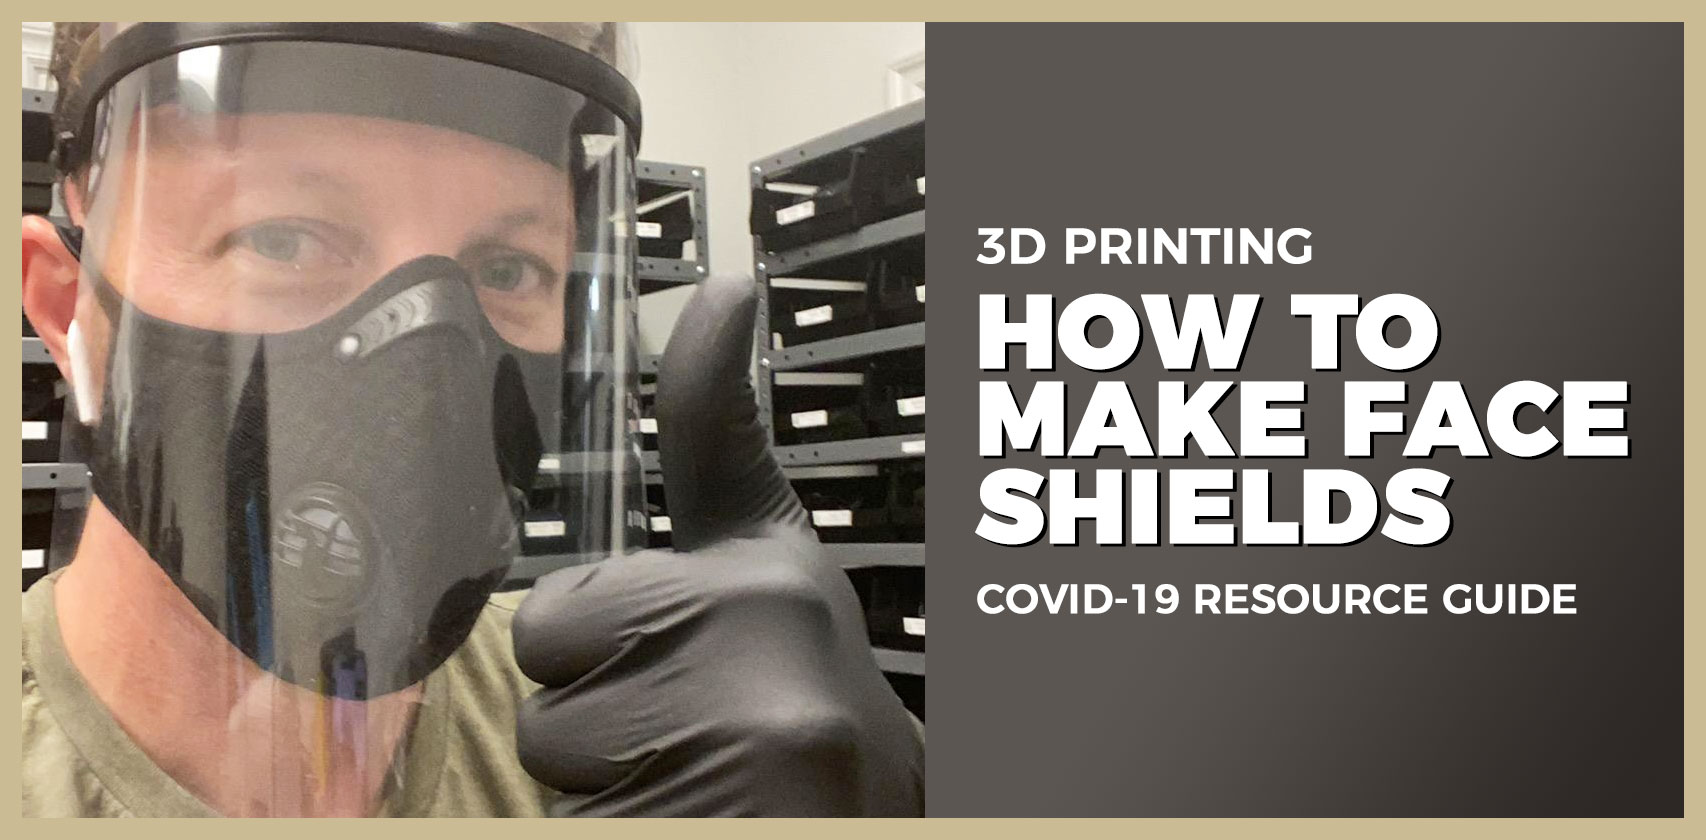 #COVID-19: Making Face Shields with 3D Printers